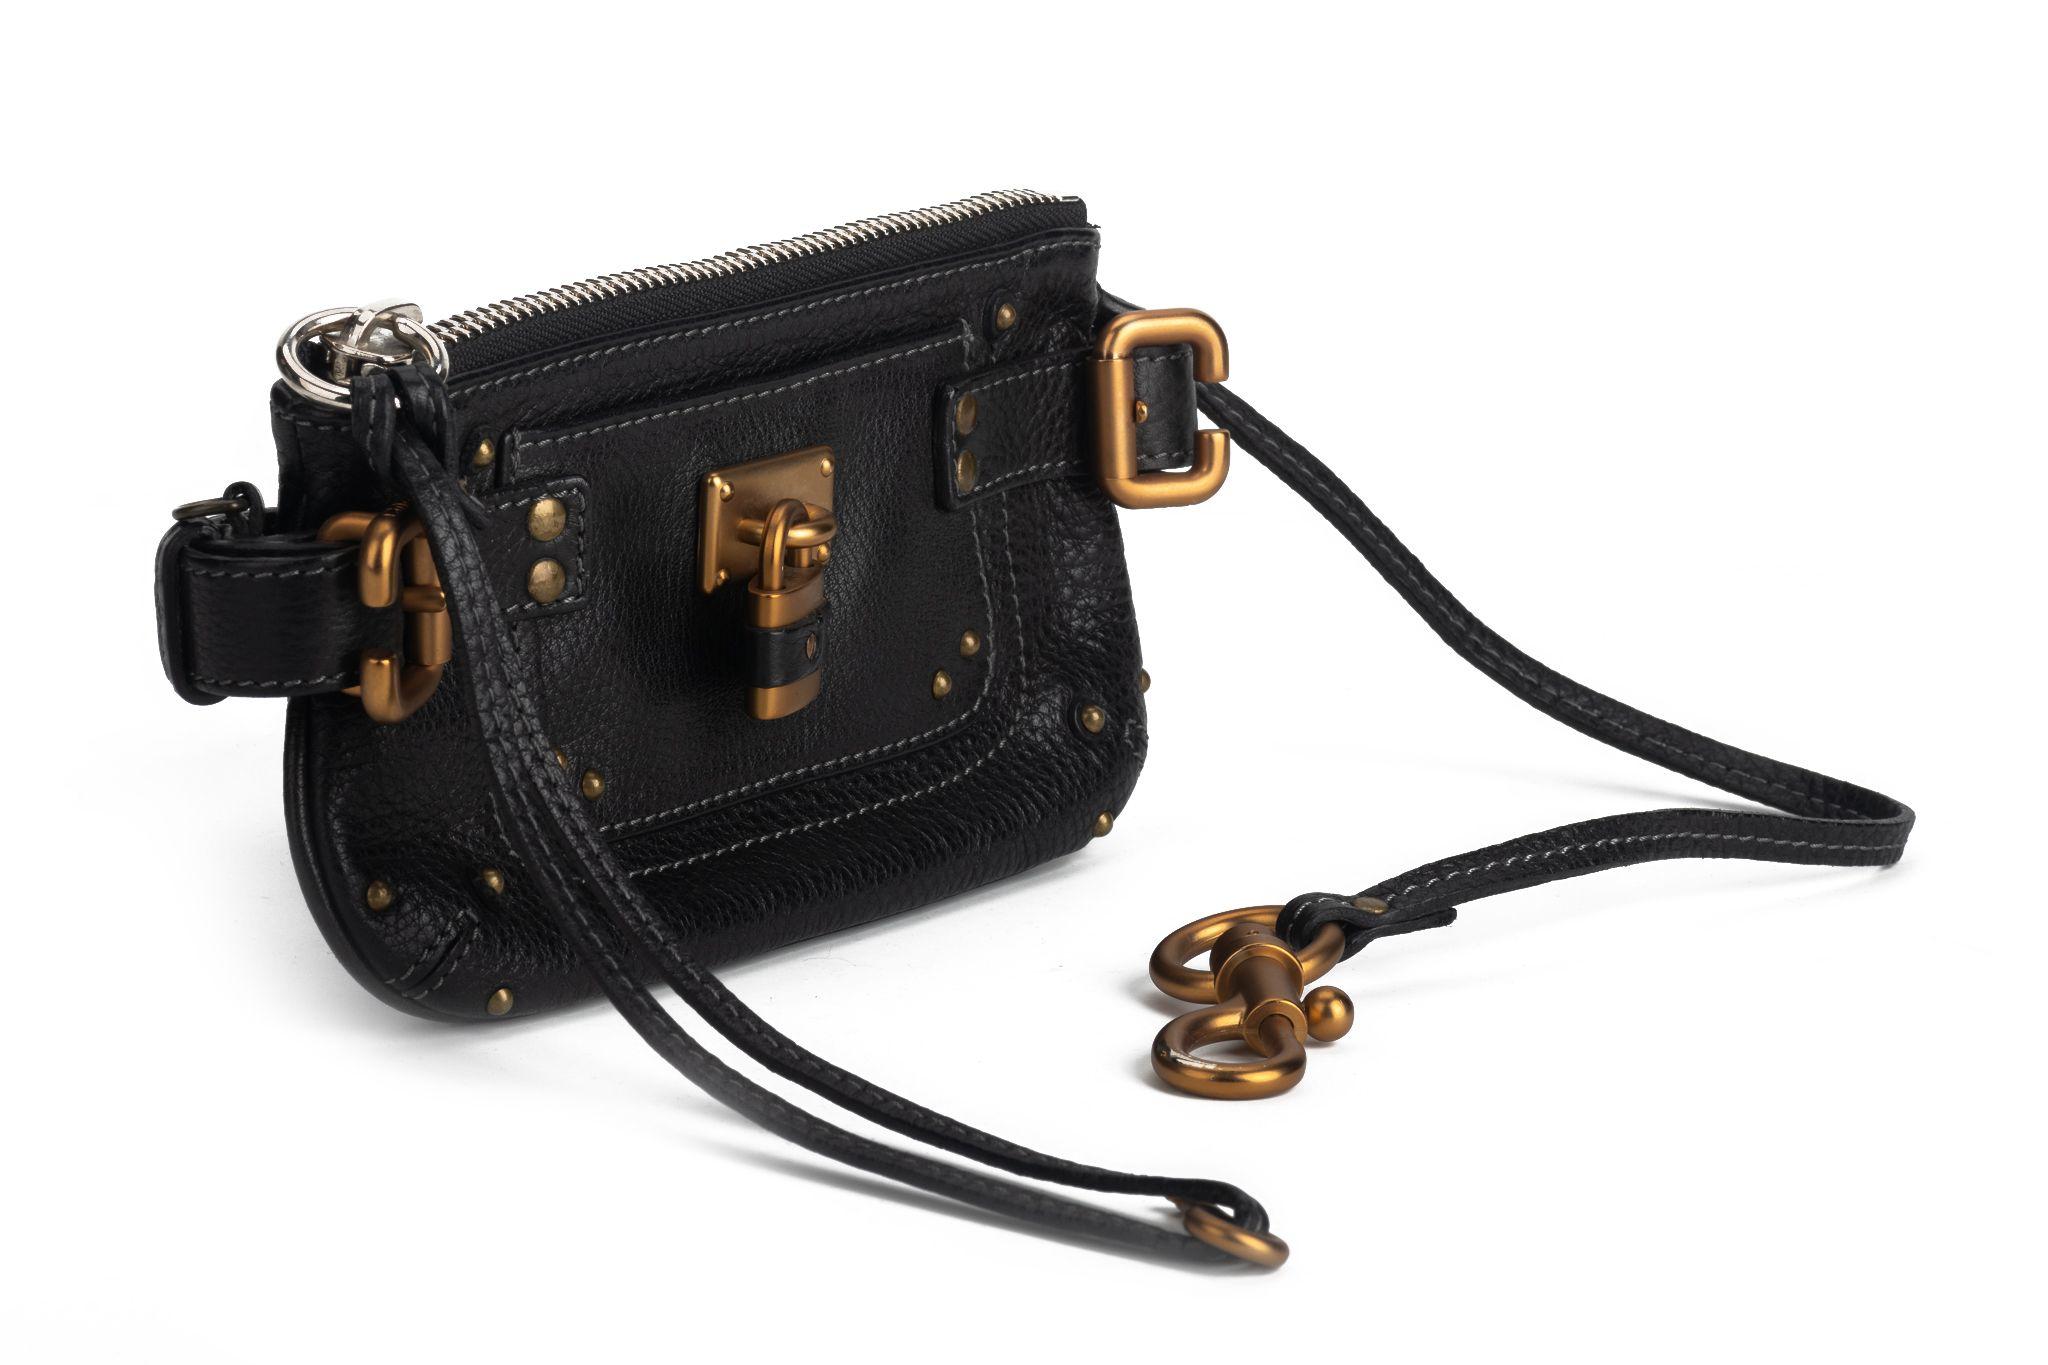 Chloe pochette bag in black with gold hard ware. The straps of the bag are adjustable to fit different sizes. It can be worn as a belt as well as crossbody. The piece is in excellent condition and comes with a dustcover.